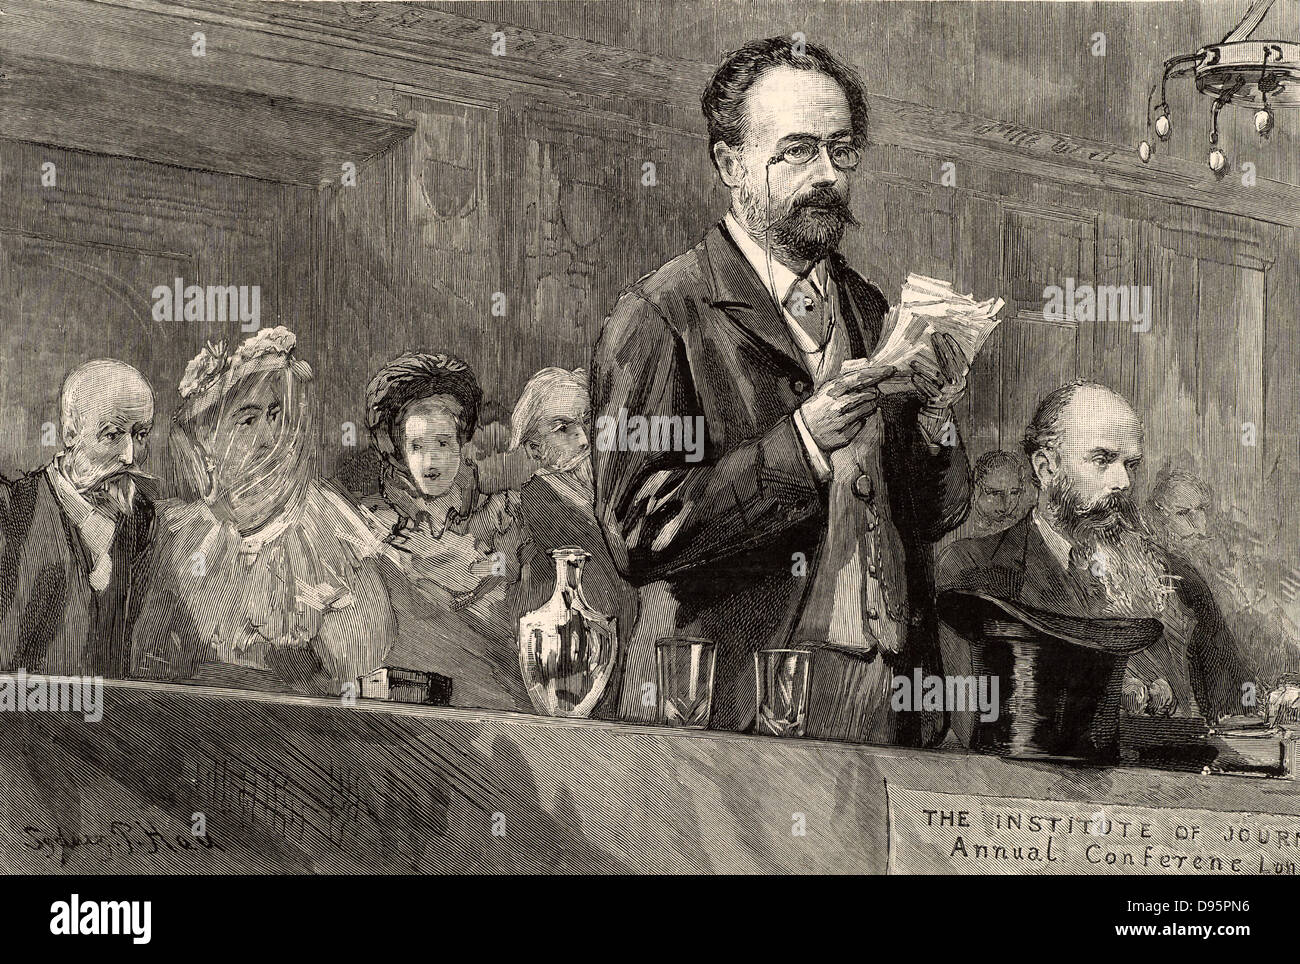 Emile Zola (1840-1902) French journalist and novelist of the Naturalistic school, addressing the conference of the Institute of Journalists in London, 1893. The title of the paper he gave was 'L'Anonymat dans la Presse' (Anonymity in Journalism). Engraving. Stock Photo